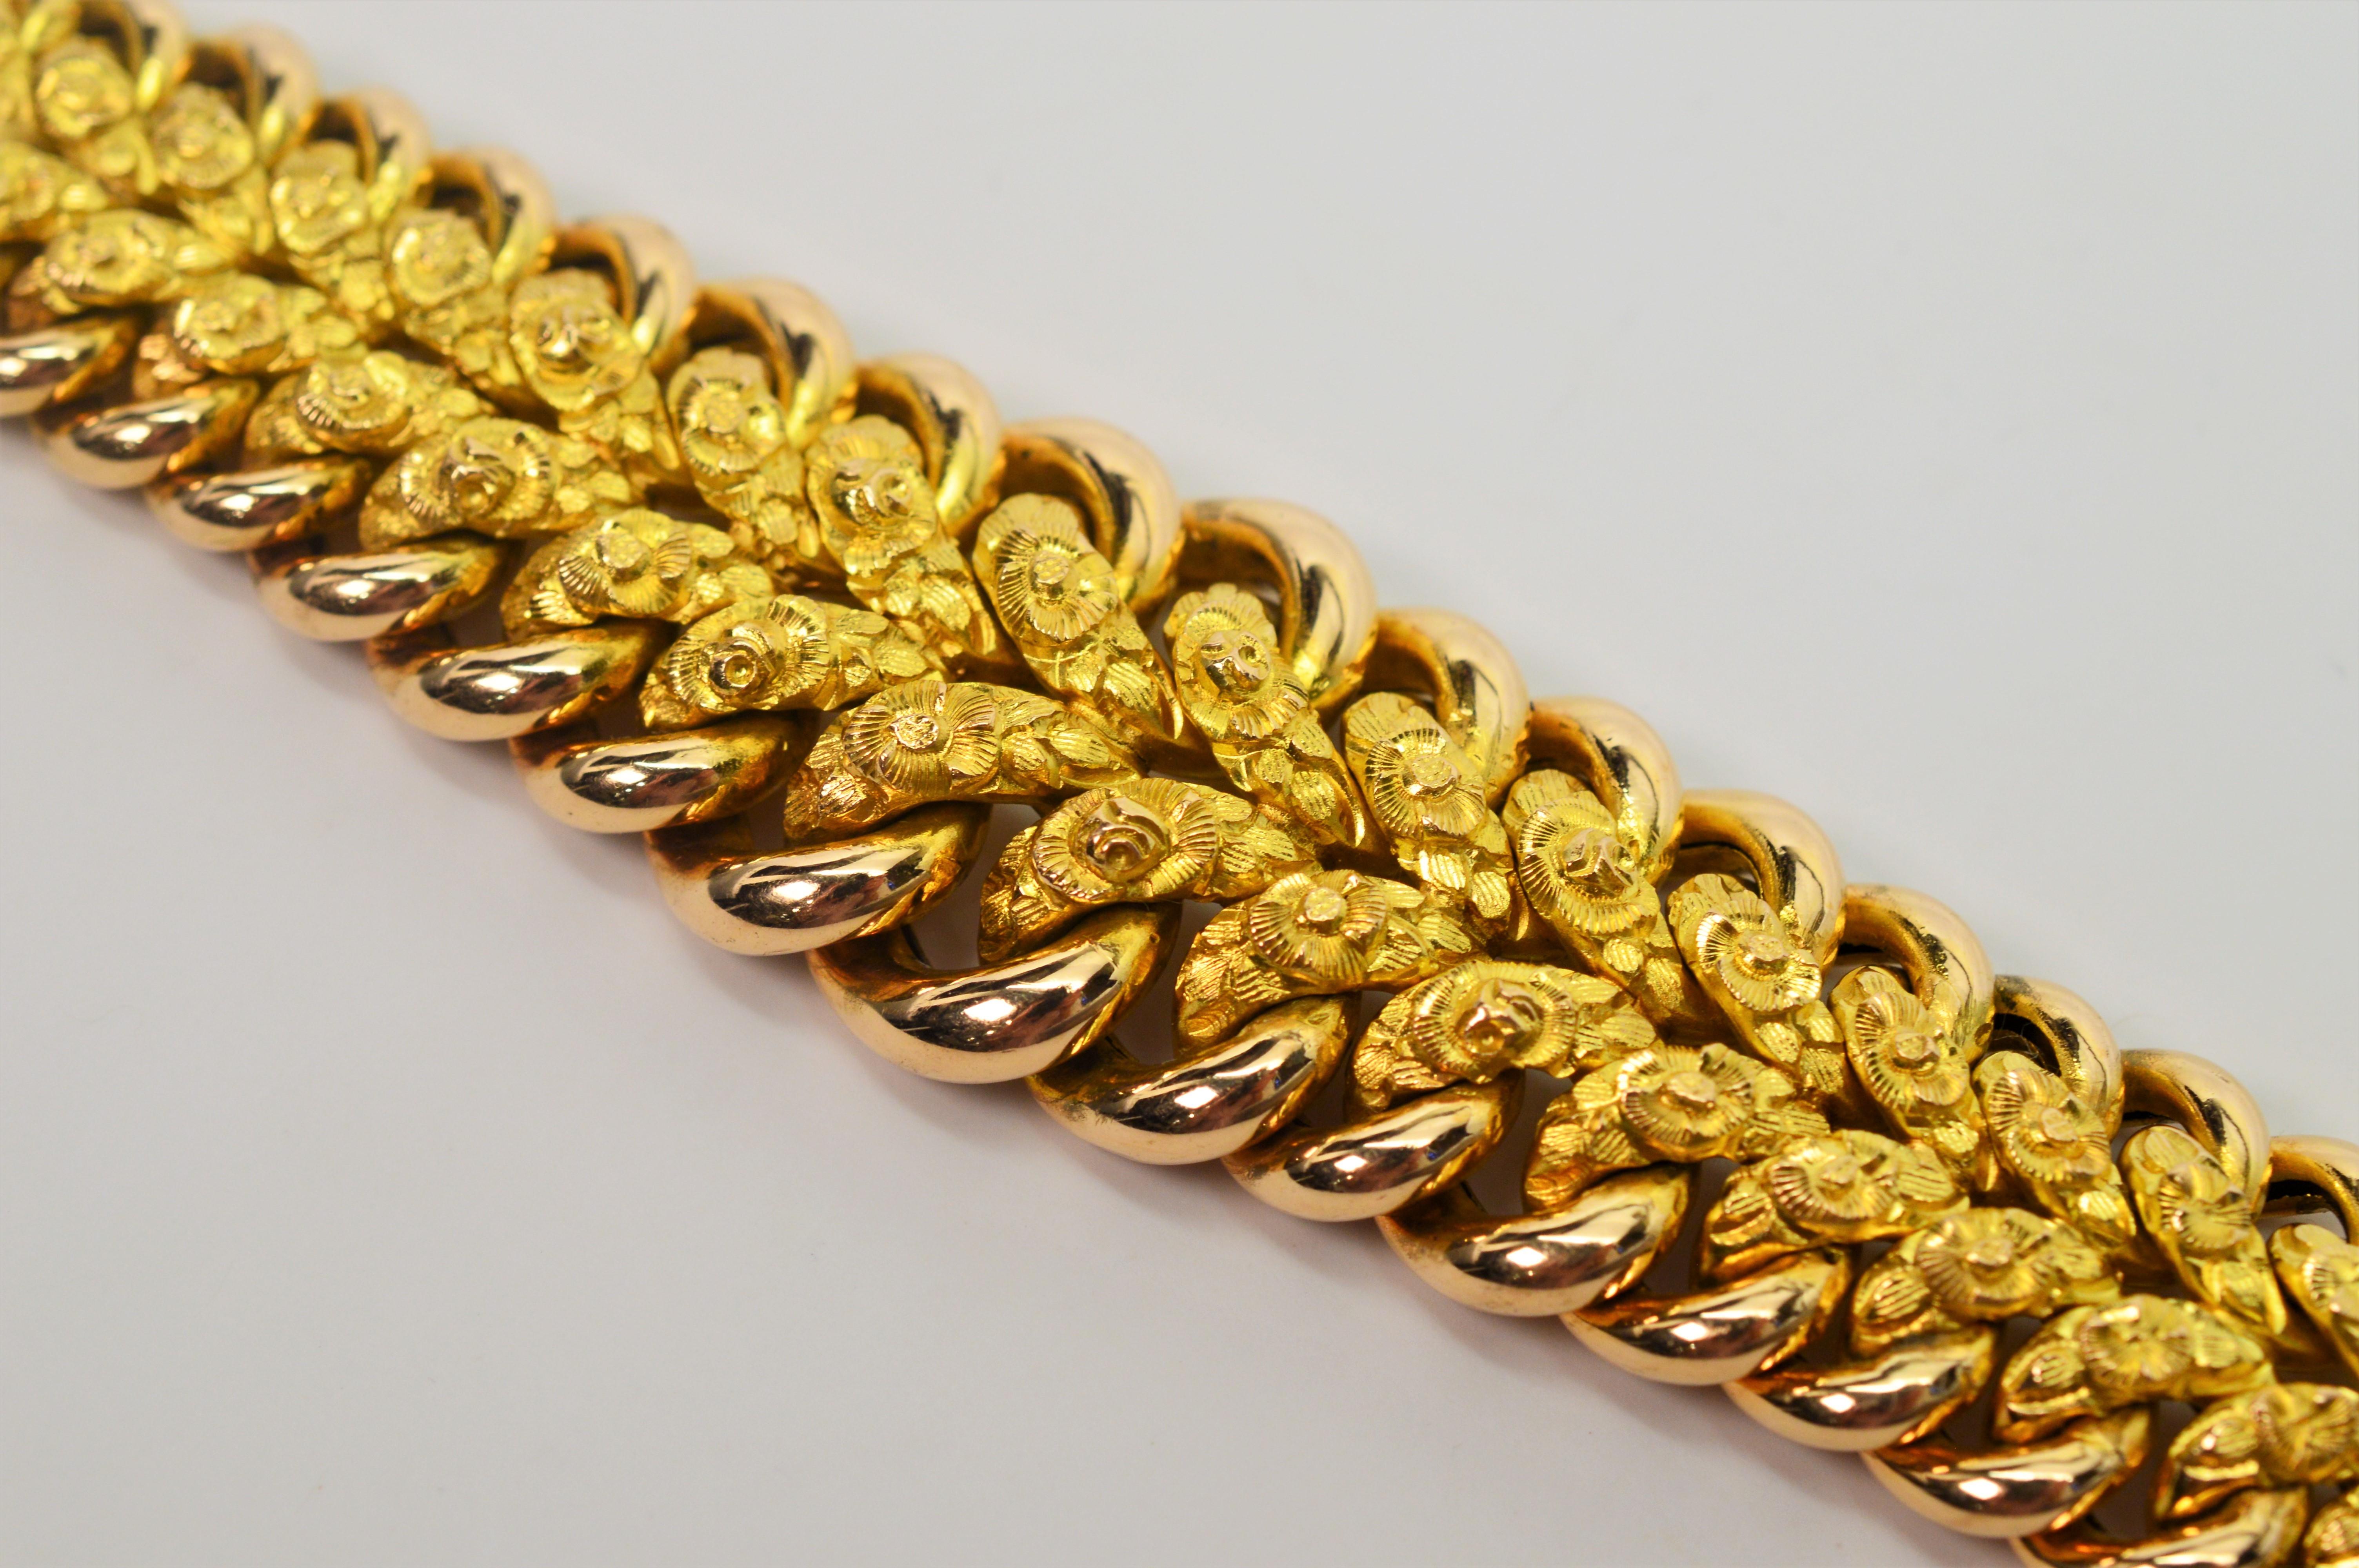 Generously sized and finely constructed in both bright and satin eighteen karat yellow gold, this fancy 1950's bracelet goes the extra mile measuring
8-1/4 inches in length. The double row of interior satin gold links have an elegant floral pattern